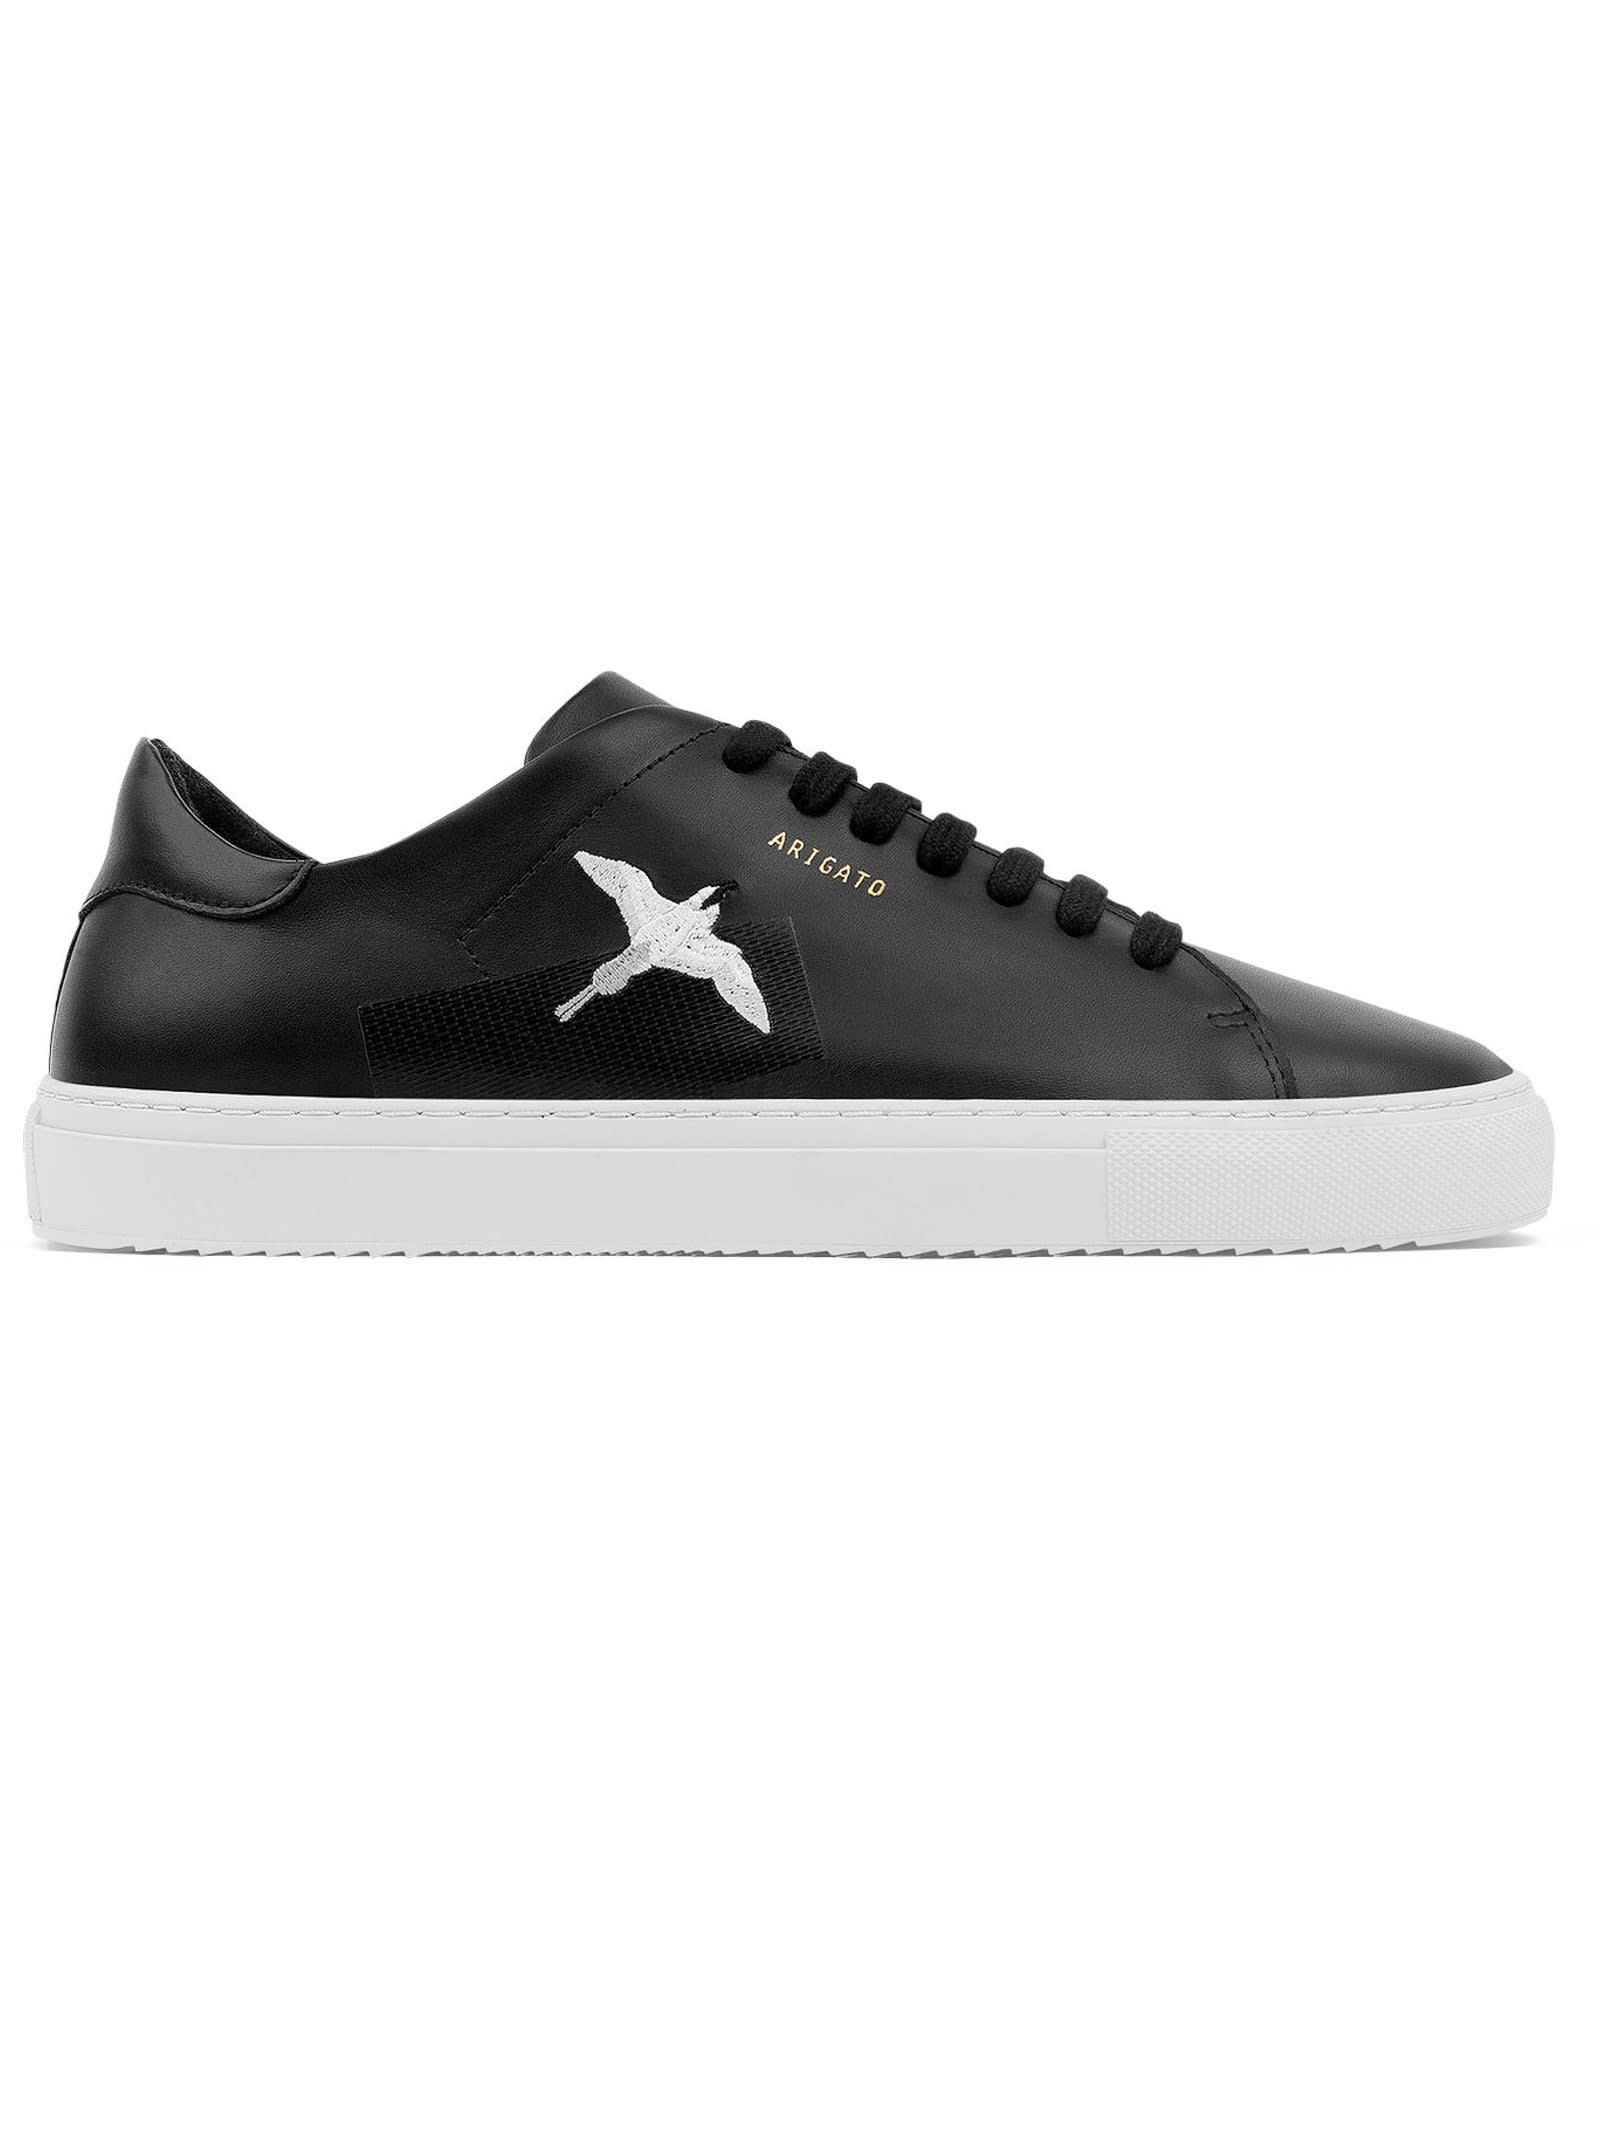 Axel Arigato Black Leather Clean 90 Sneakers